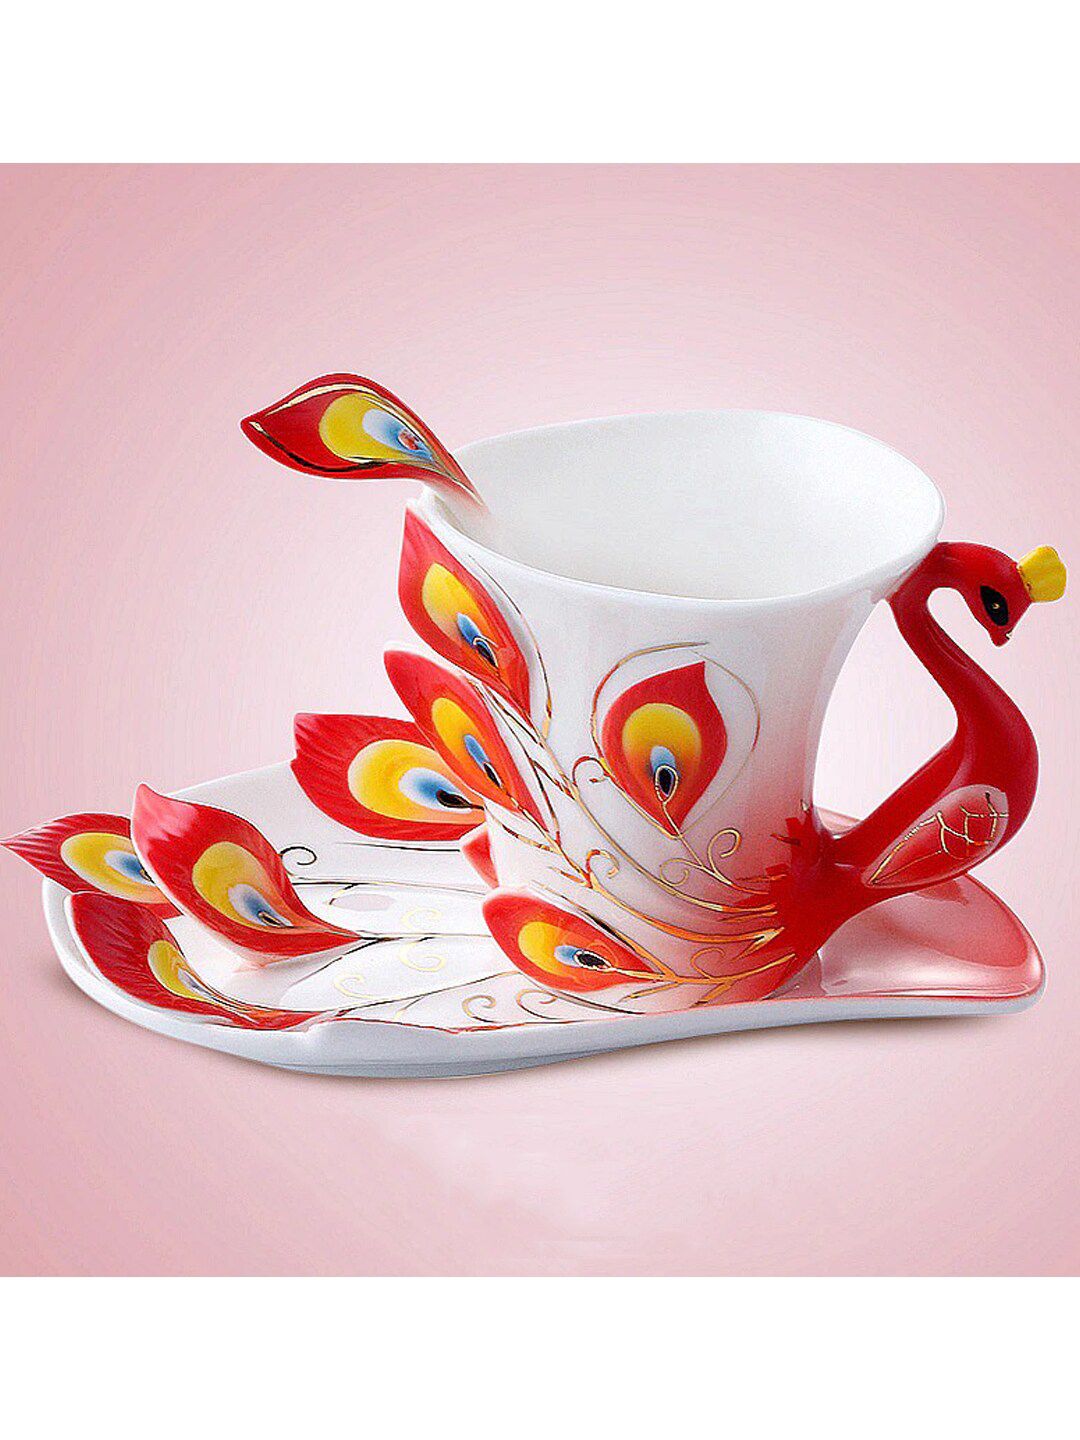 BonZeaL Red & White 3D Peacock Printed Ceramic Glossy Cup and Saucer with Spoon Price in India